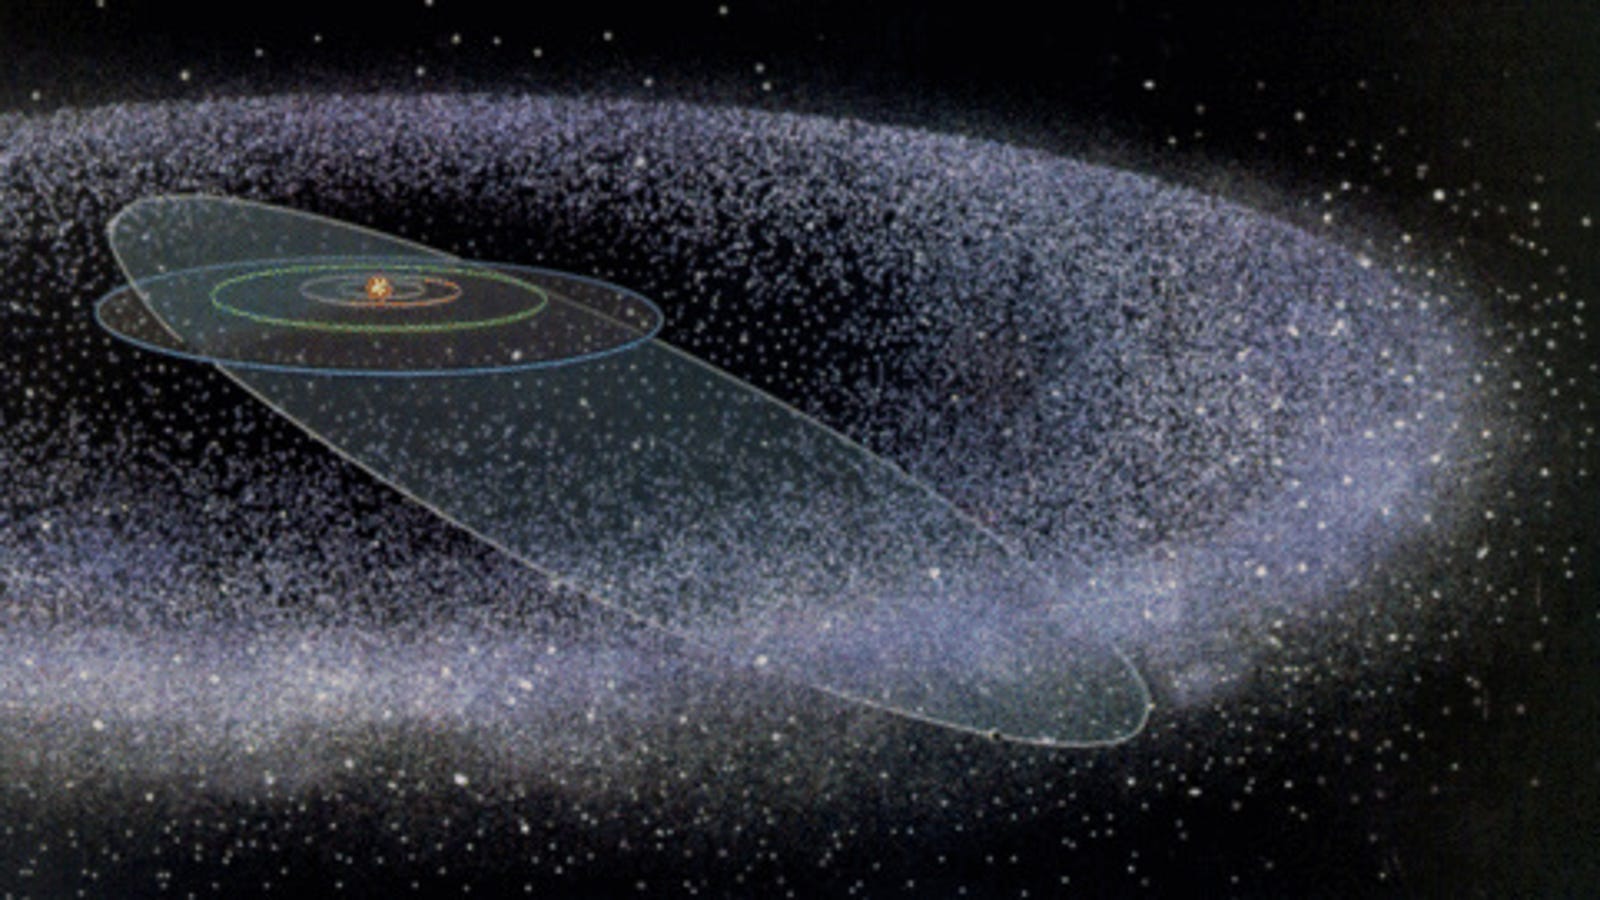 Could there be life in the Kuiper Belt?